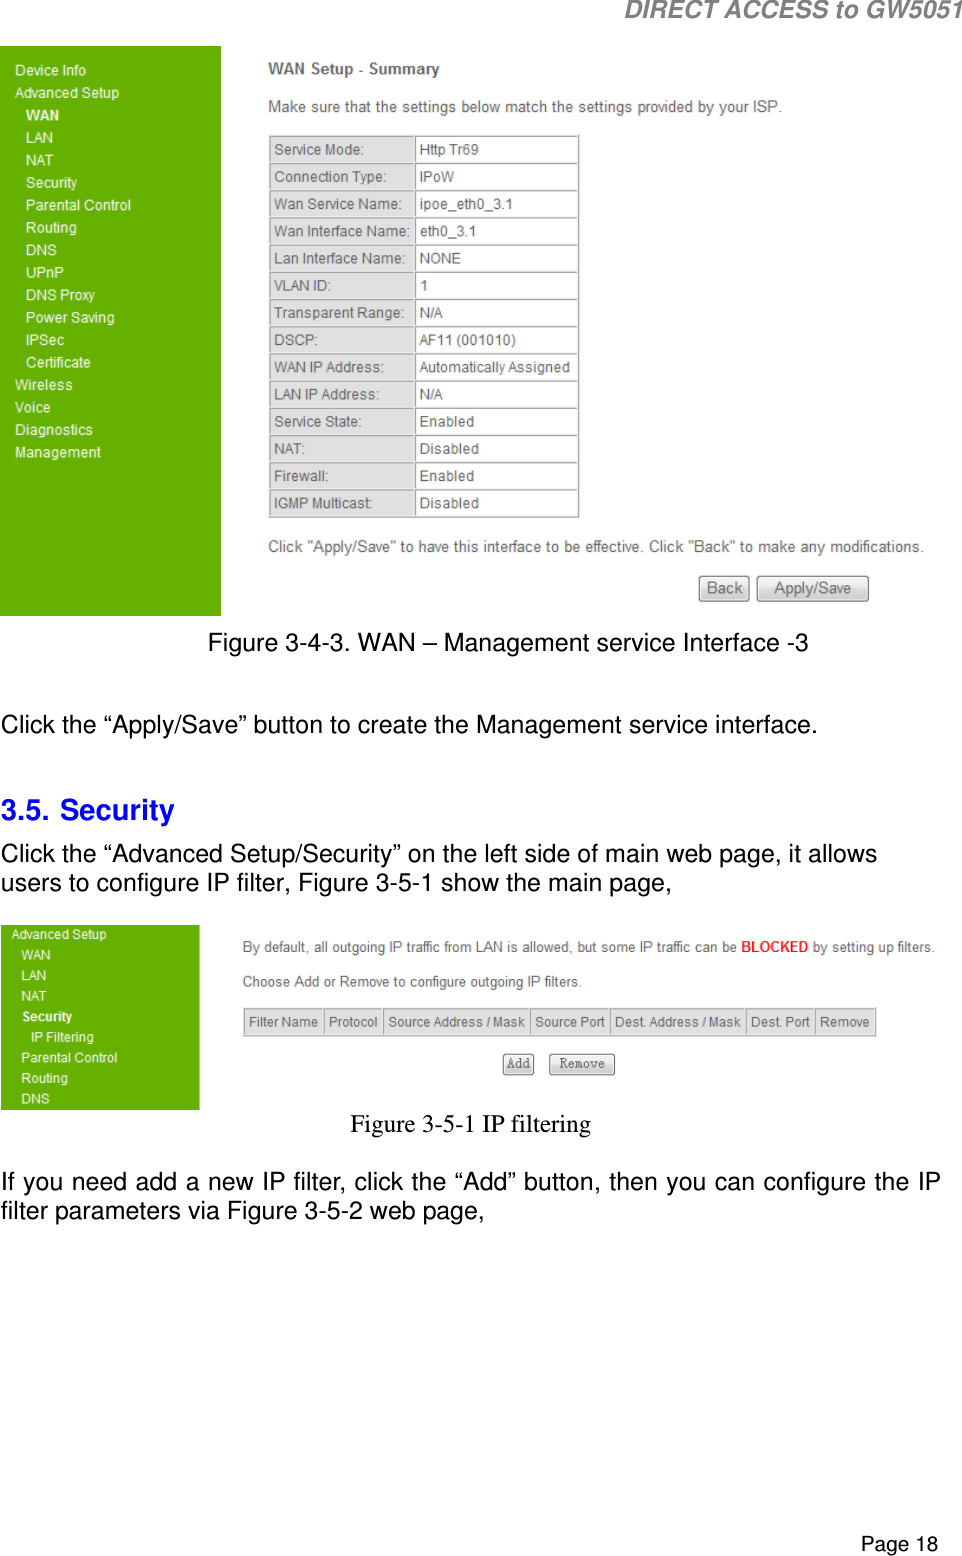                                                                                                                                                                                                                           DIRECT ACCESS to GW5051    Page 18  Figure 3-4-3. WAN – Management service Interface -3  Click the “Apply/Save” button to create the Management service interface.  3.5. Security Click the “Advanced Setup/Security” on the left side of main web page, it allows users to configure IP filter, Figure 3-5-1 show the main page,    Figure 3-5-1 IP filtering  If you need add a new IP filter, click the “Add” button, then you can configure the IP filter parameters via Figure 3-5-2 web page,  